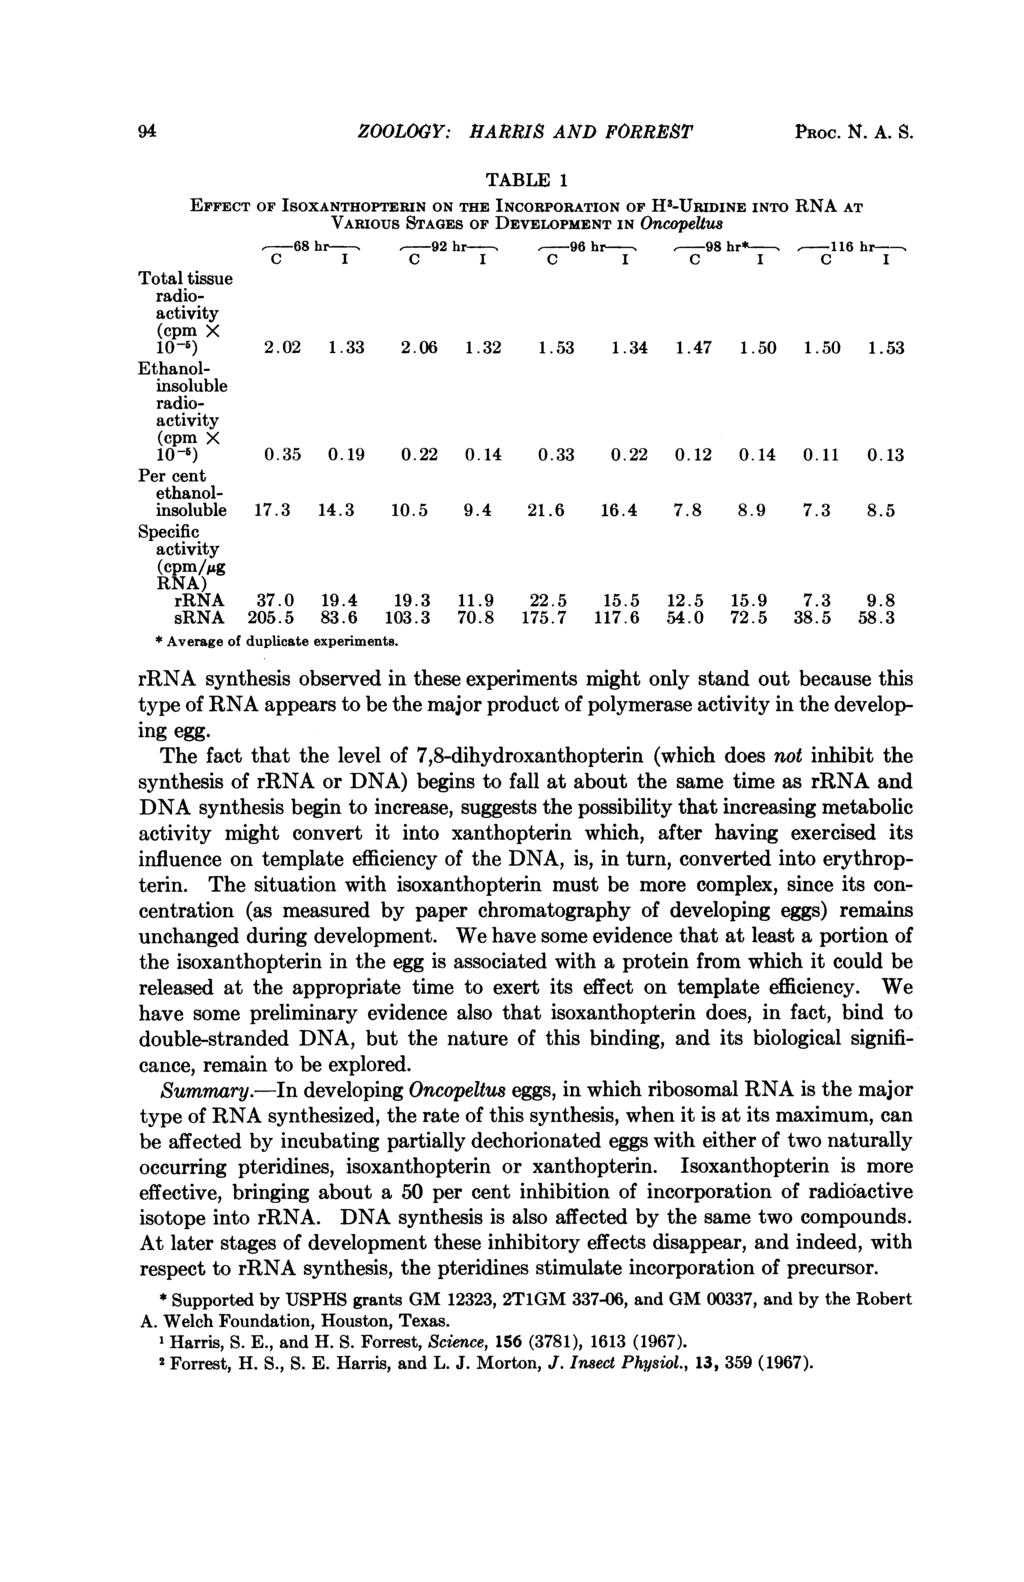 94 ZOOLOCY: HIARRIS AND FORREST PROC. N. A. S. TABLE 1 EFFECT OF ISOXANTHOPTERIN ON THE INCORPORATION OF H3-URIDINE INTO RNA AT VARIOUS STAGES OF DEVELOPMENT IN Oncopeltus -68 hr-..-92 hr-- -96 hr--.